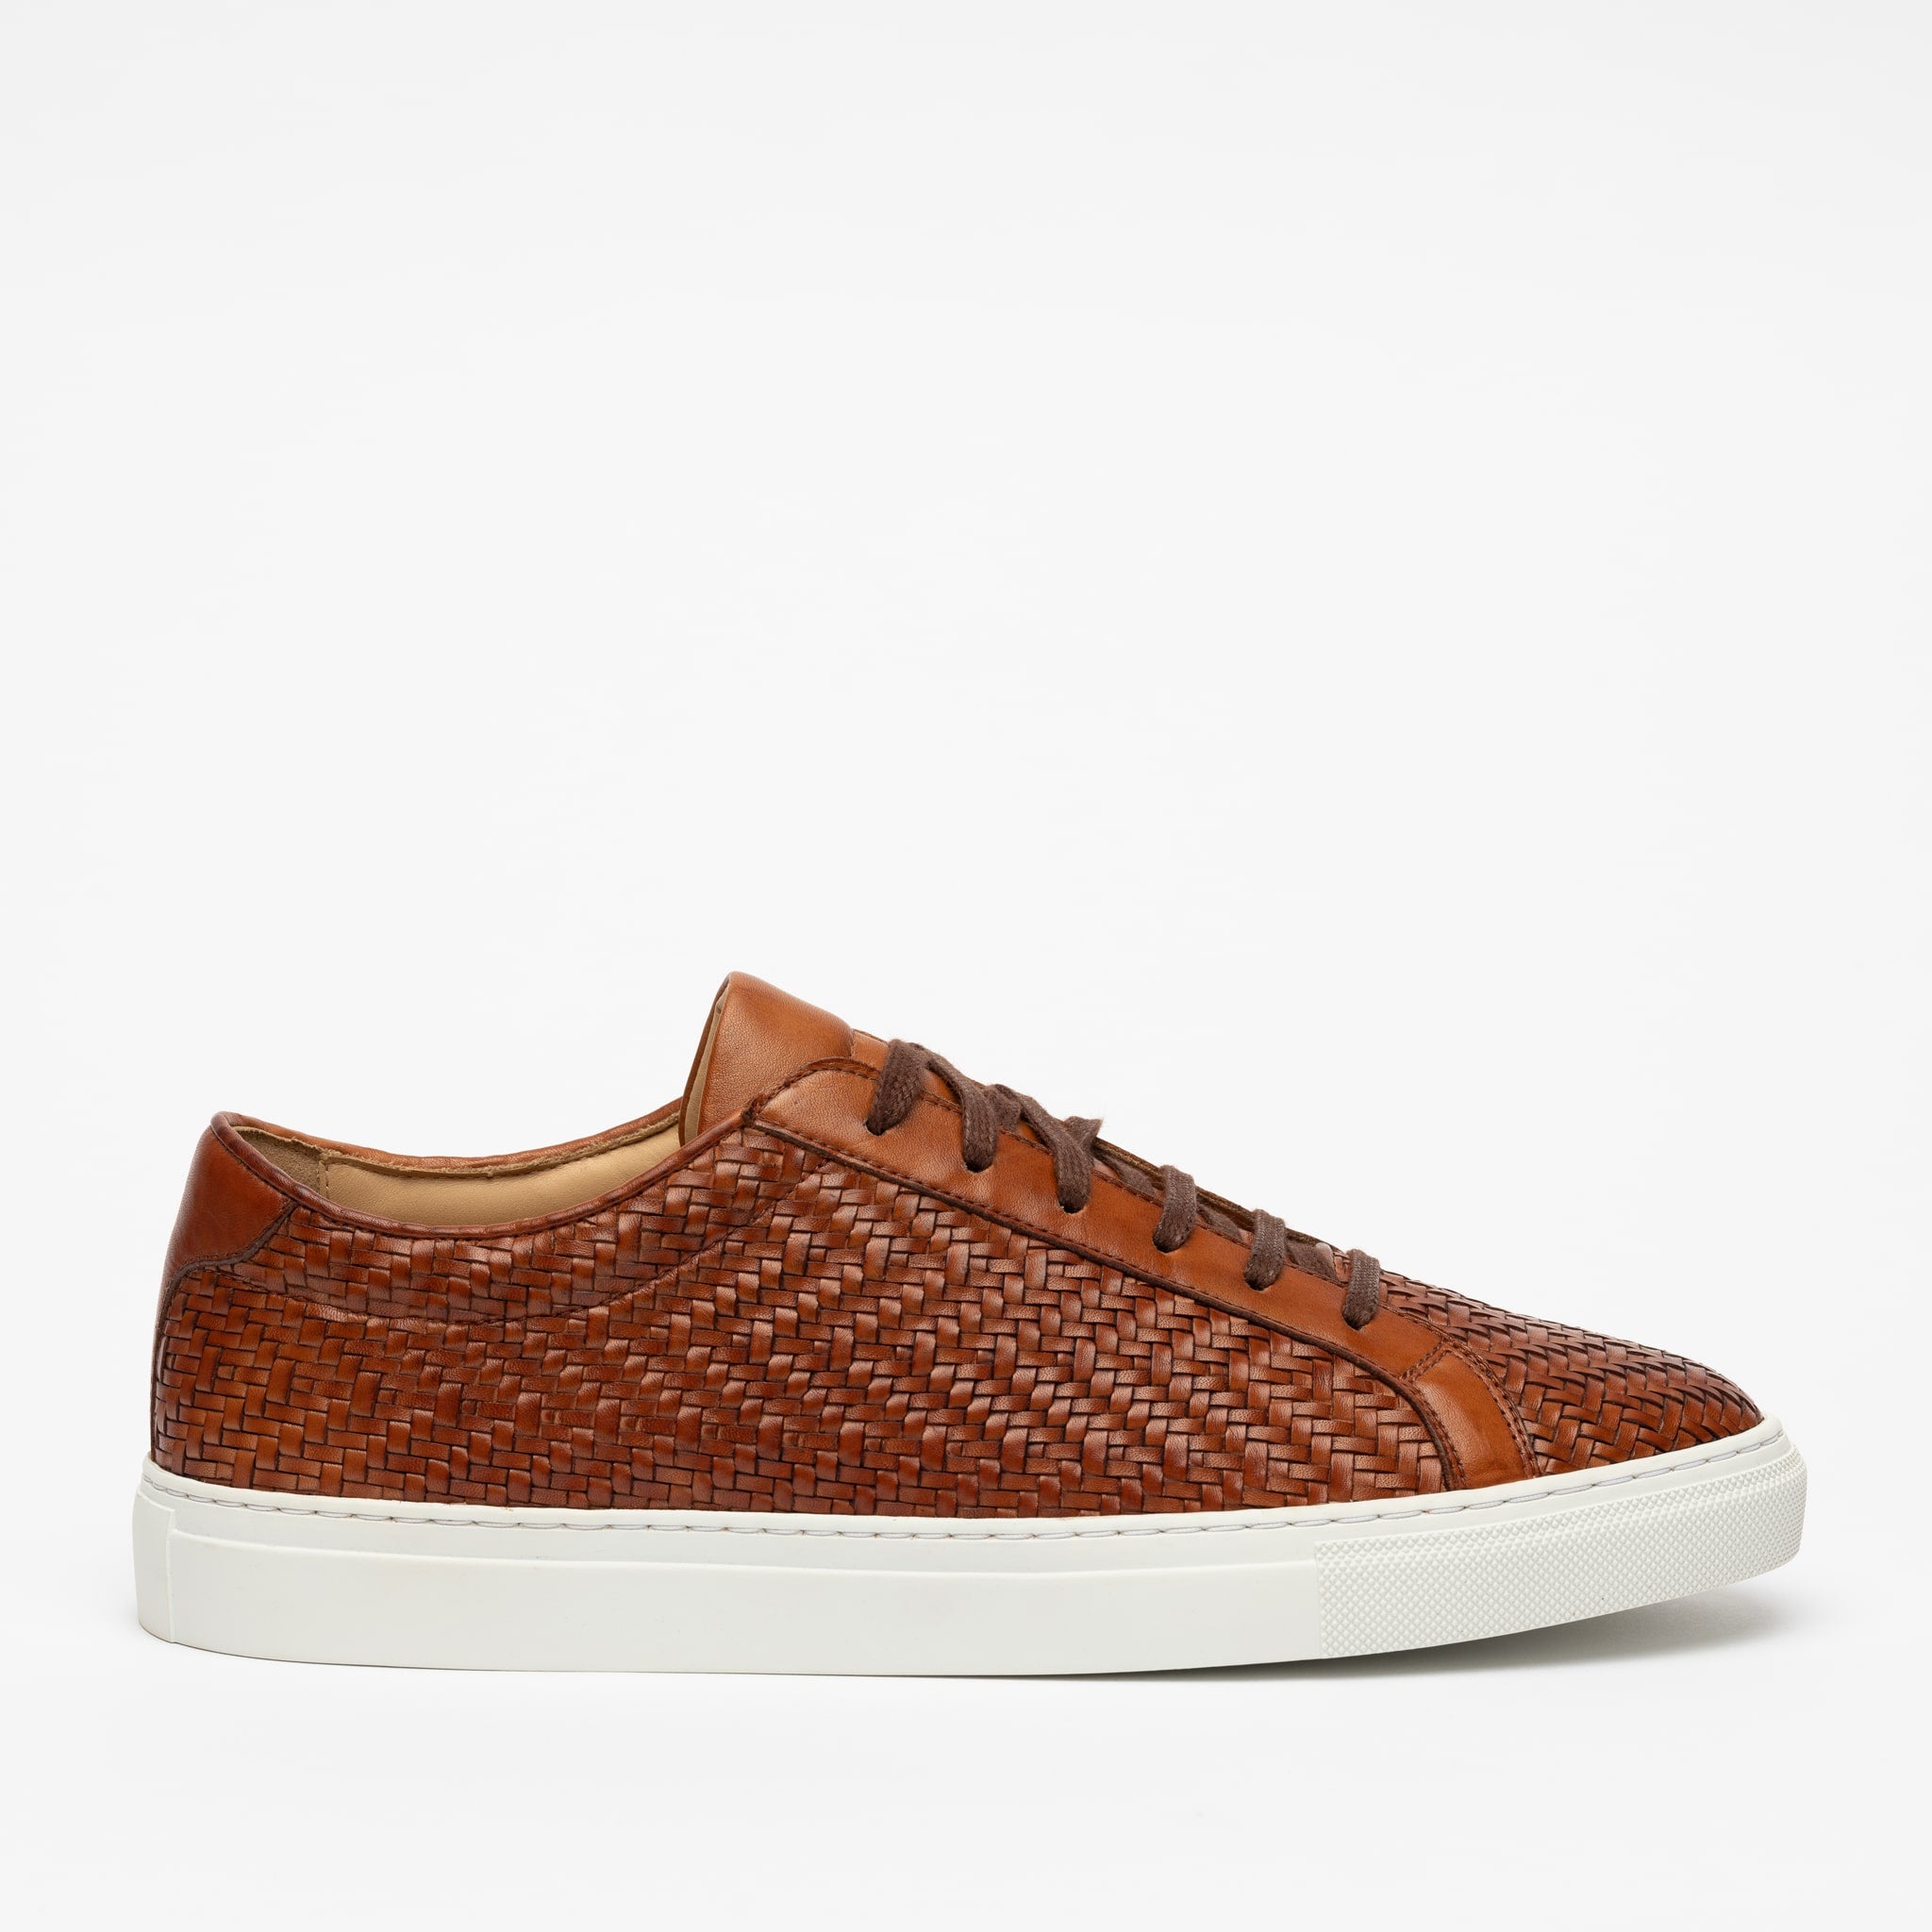 The Sneaker in Woven Brown Leather TAFT